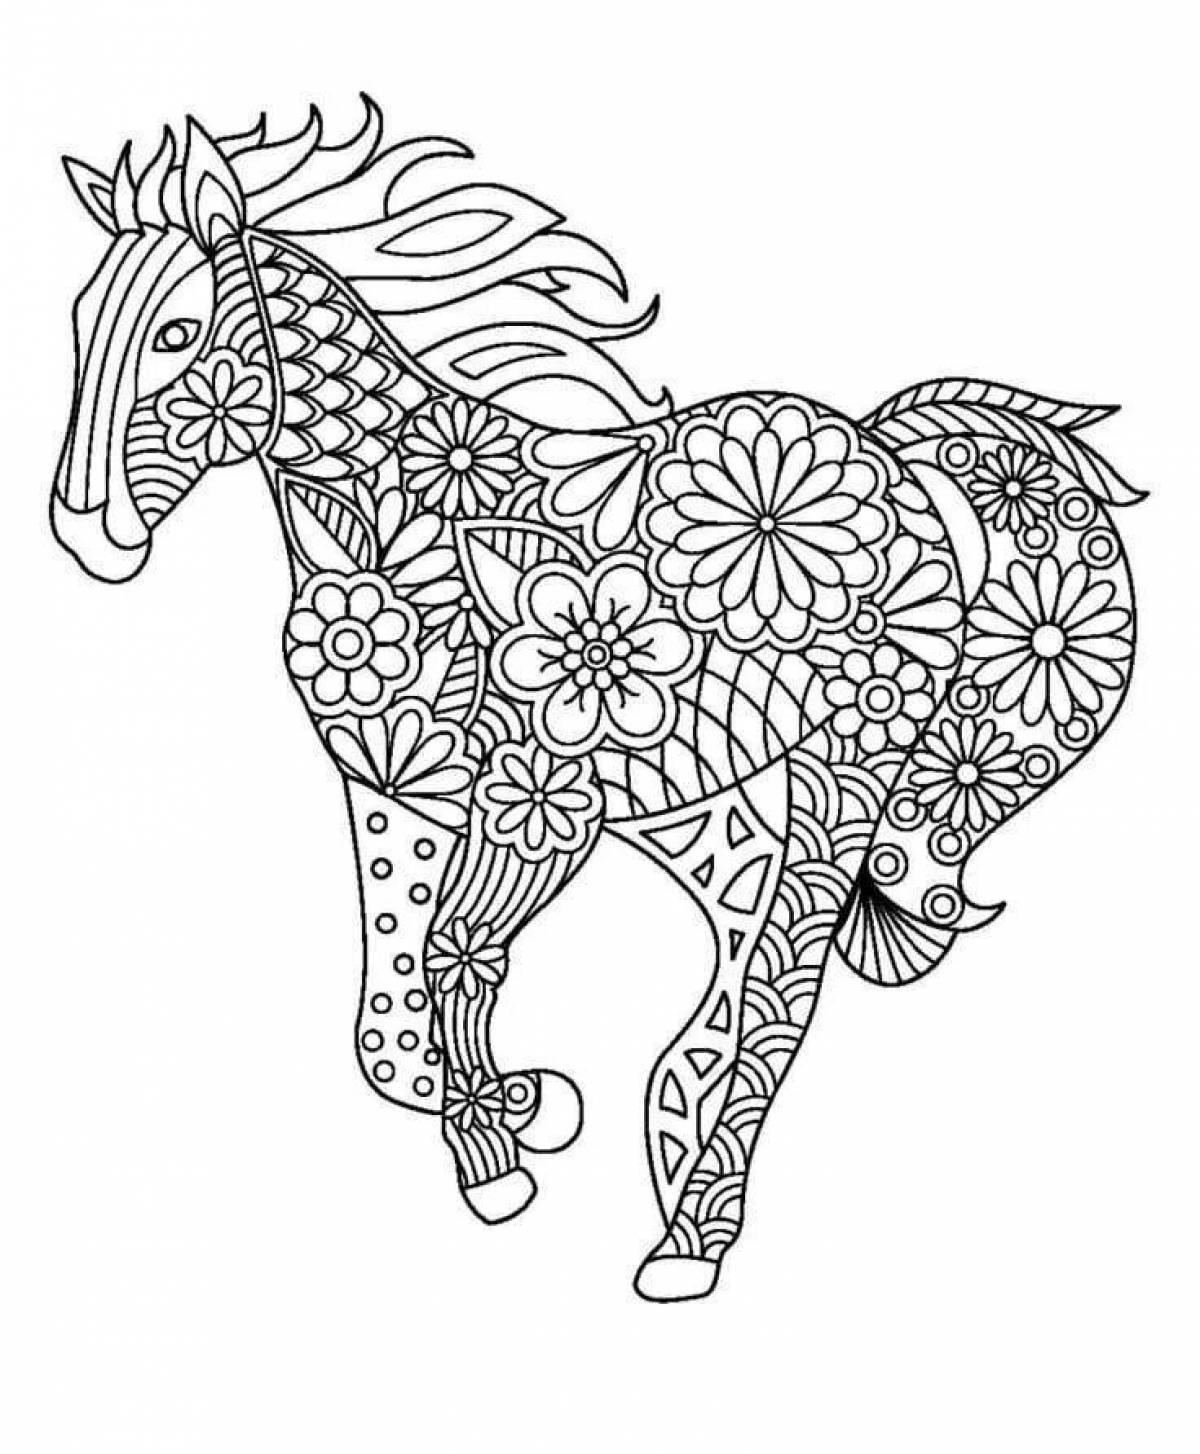 Unique animal coloring page with pattern